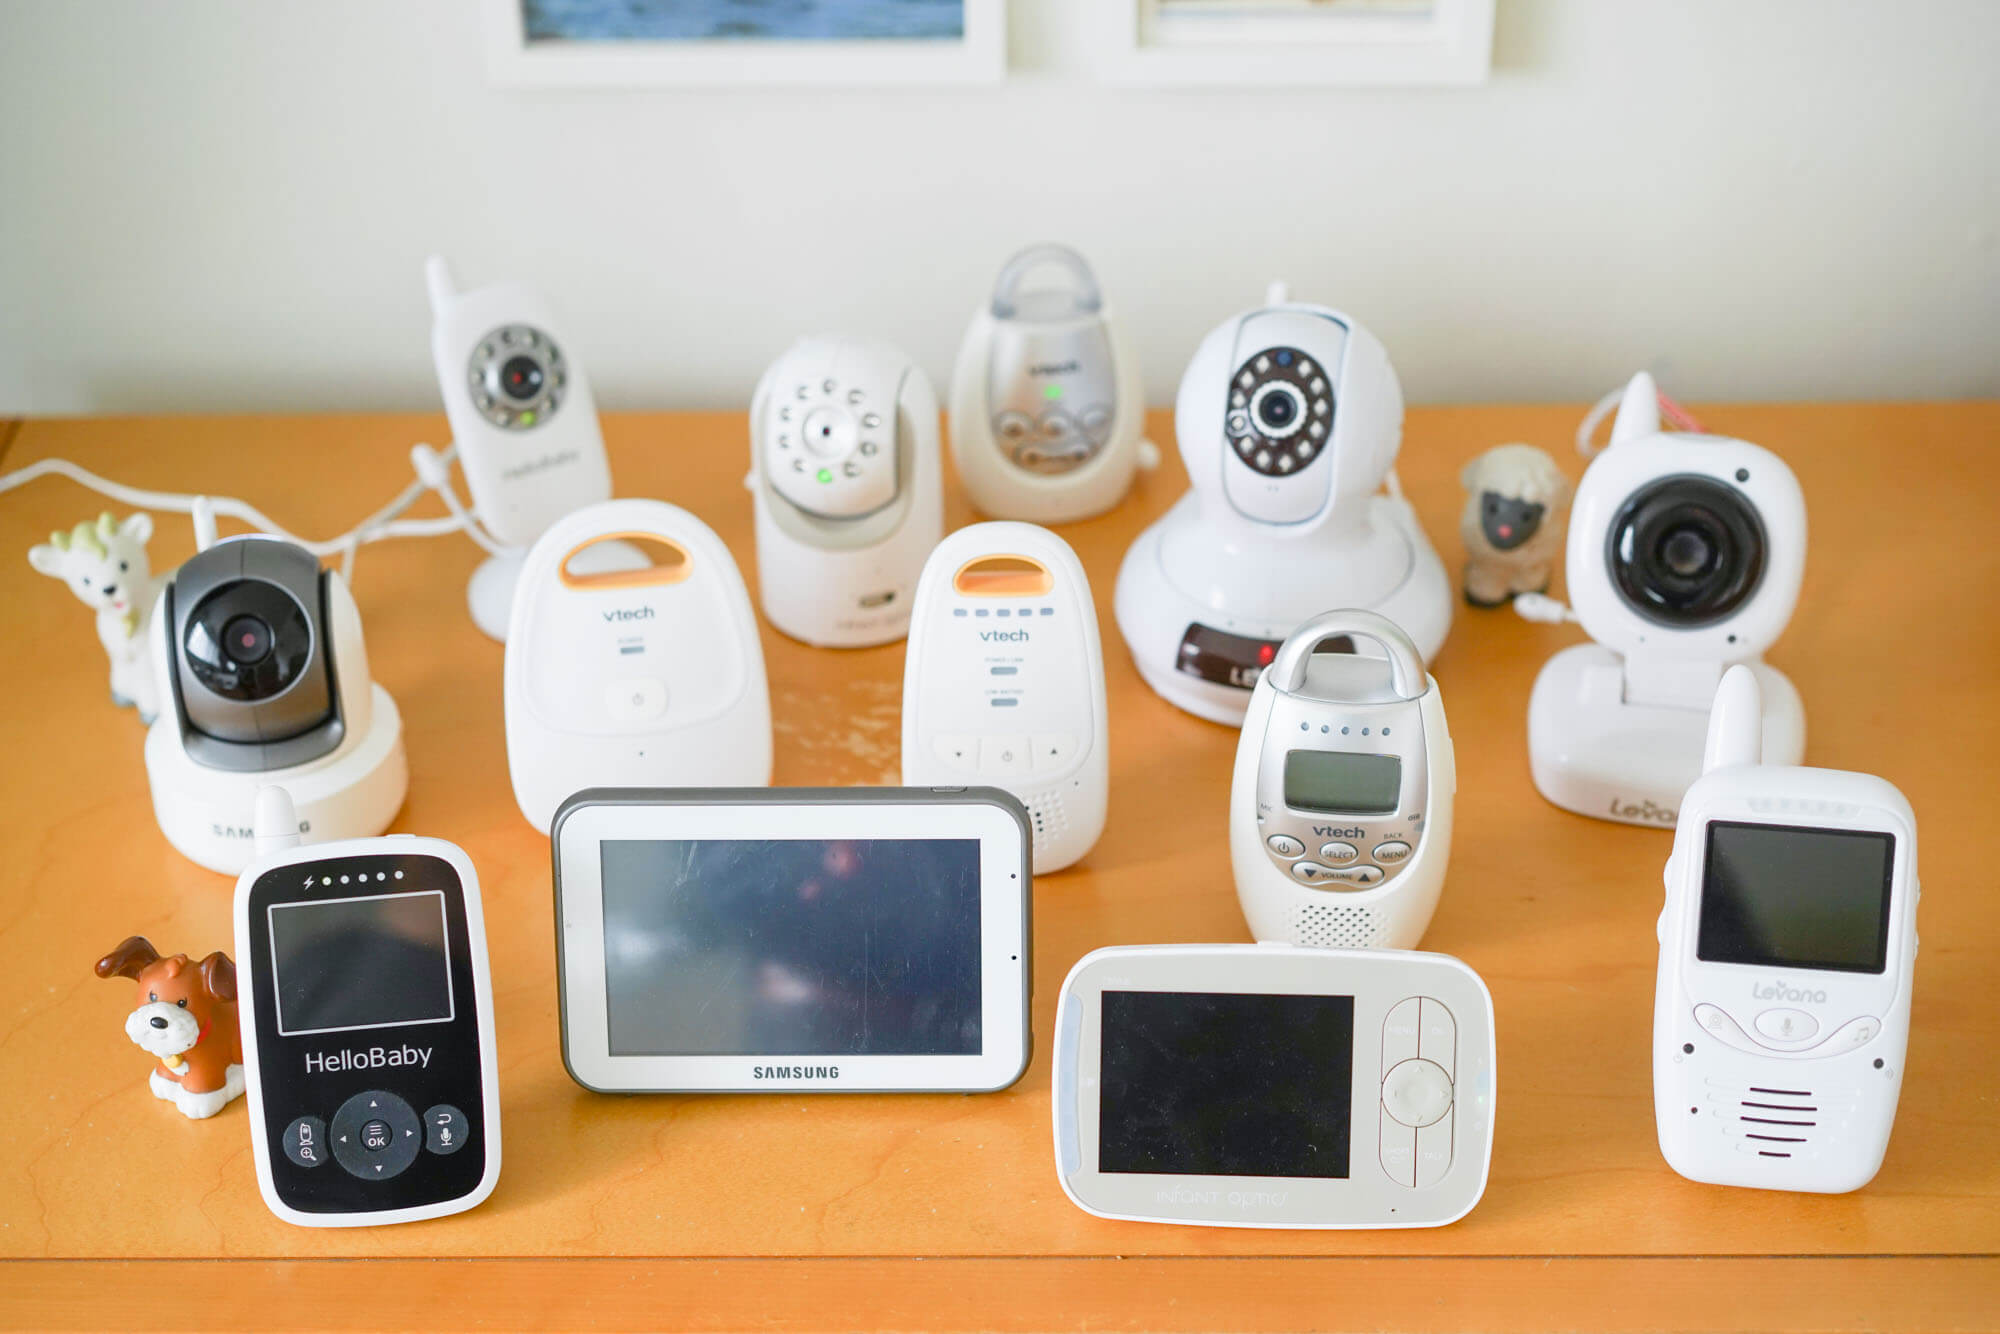 The best baby monitors – including audio and video options